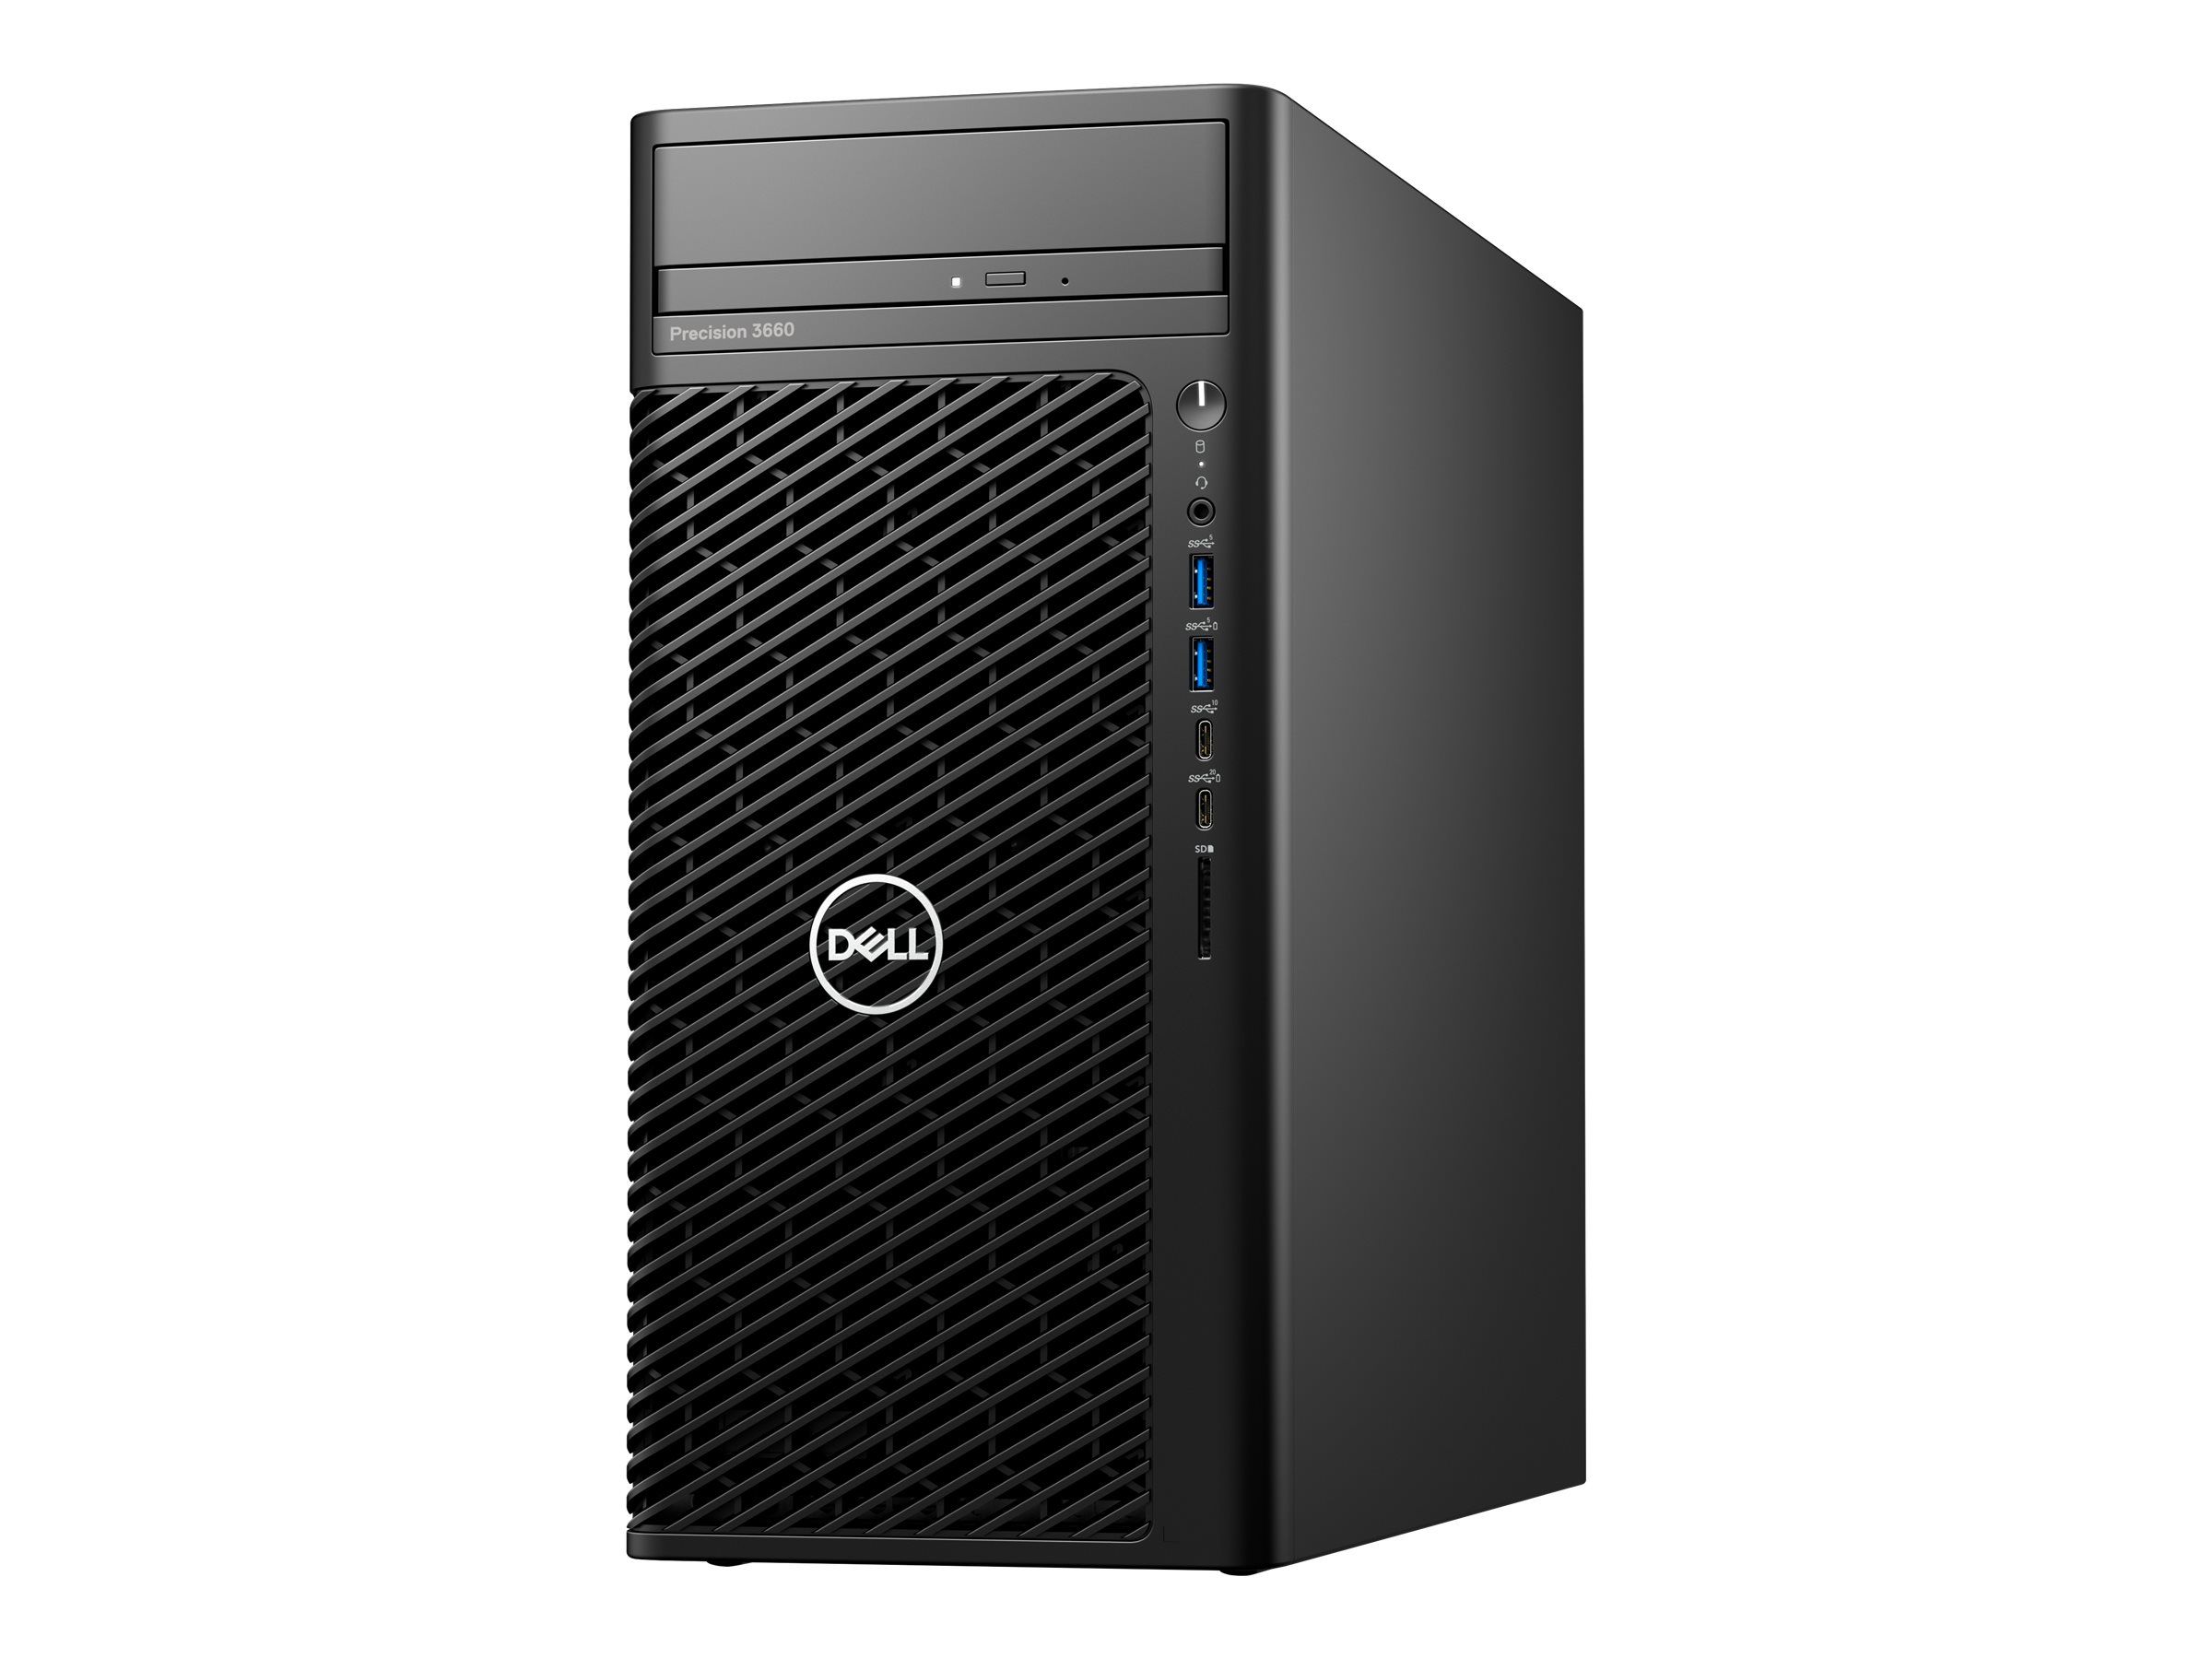 Dell Precision 3660 Tower,Intel Core i9-13900K(36MB, 24Core(8+16),3.0GHz/5.8GHz),64GB(2x32)4400MHz DDR5,1TB(M.2)NVMe PCIe SSD,noDVD,Nvidia GeForce RTX 4090/24GB,noWi-Fi,Dell Mouse-MS116,Dell Keyboard-KB216,Win11Pro,3Yr NBD_3